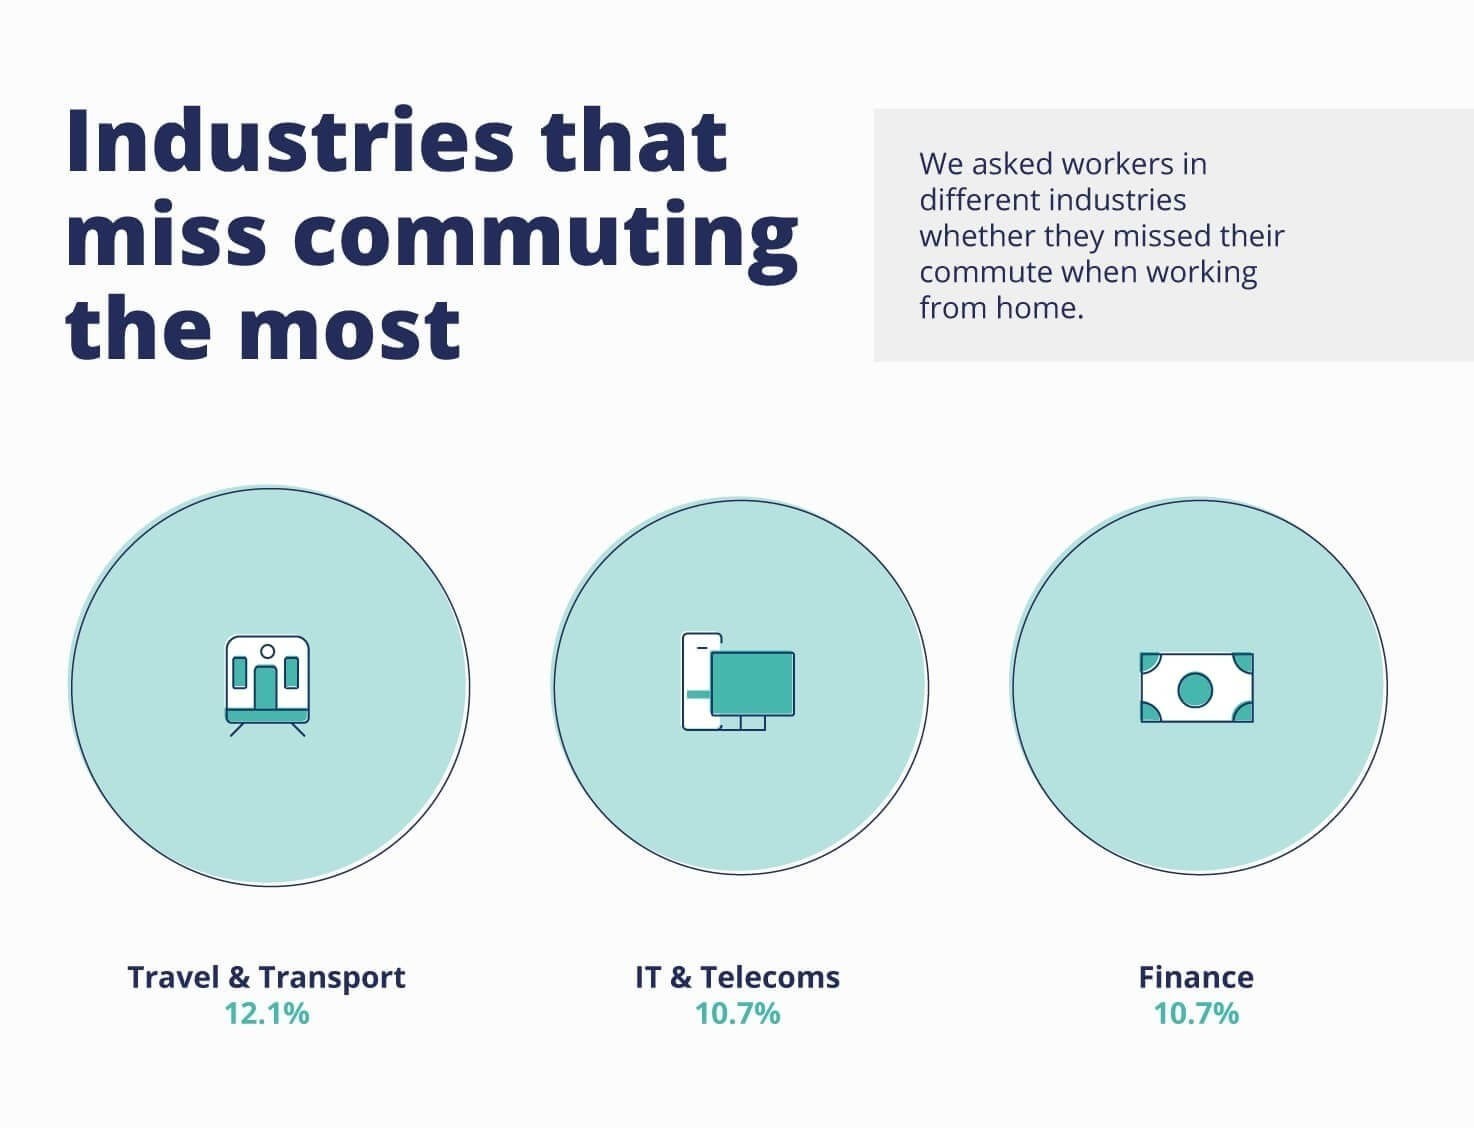 Graphic revealing which industries missed commuting the most